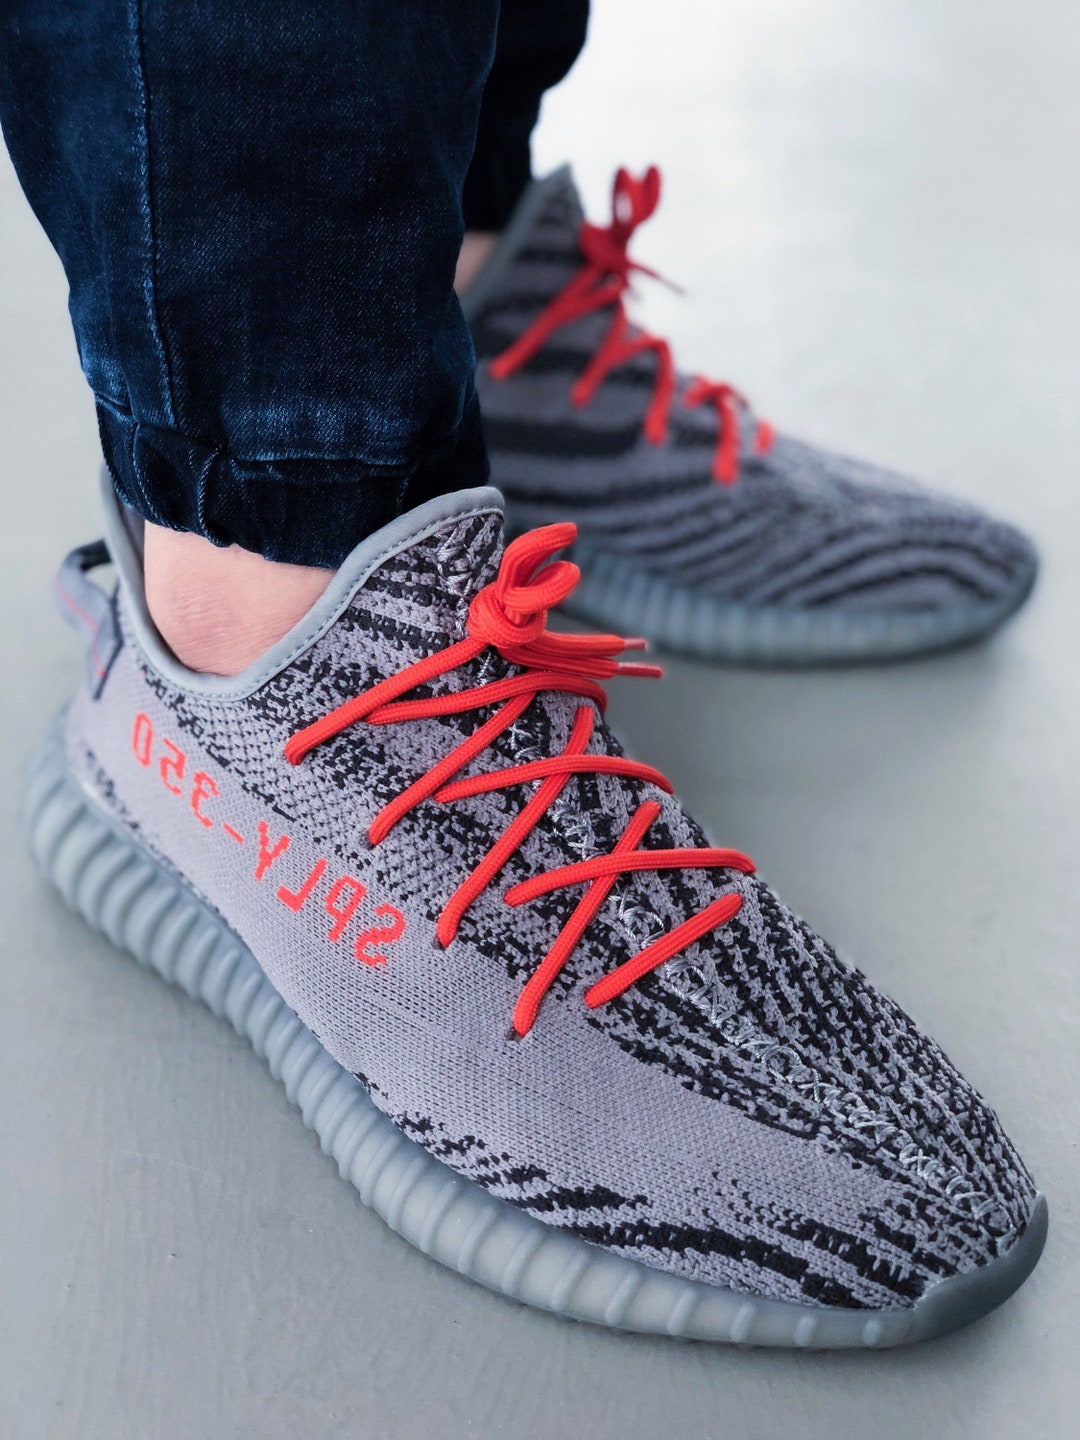 Premium Rope Shoe Laces For Yeezy Boost V2 350 Desert Sage True Form Beluga  Tail Light Clay Pirate Black Turtledove YZY